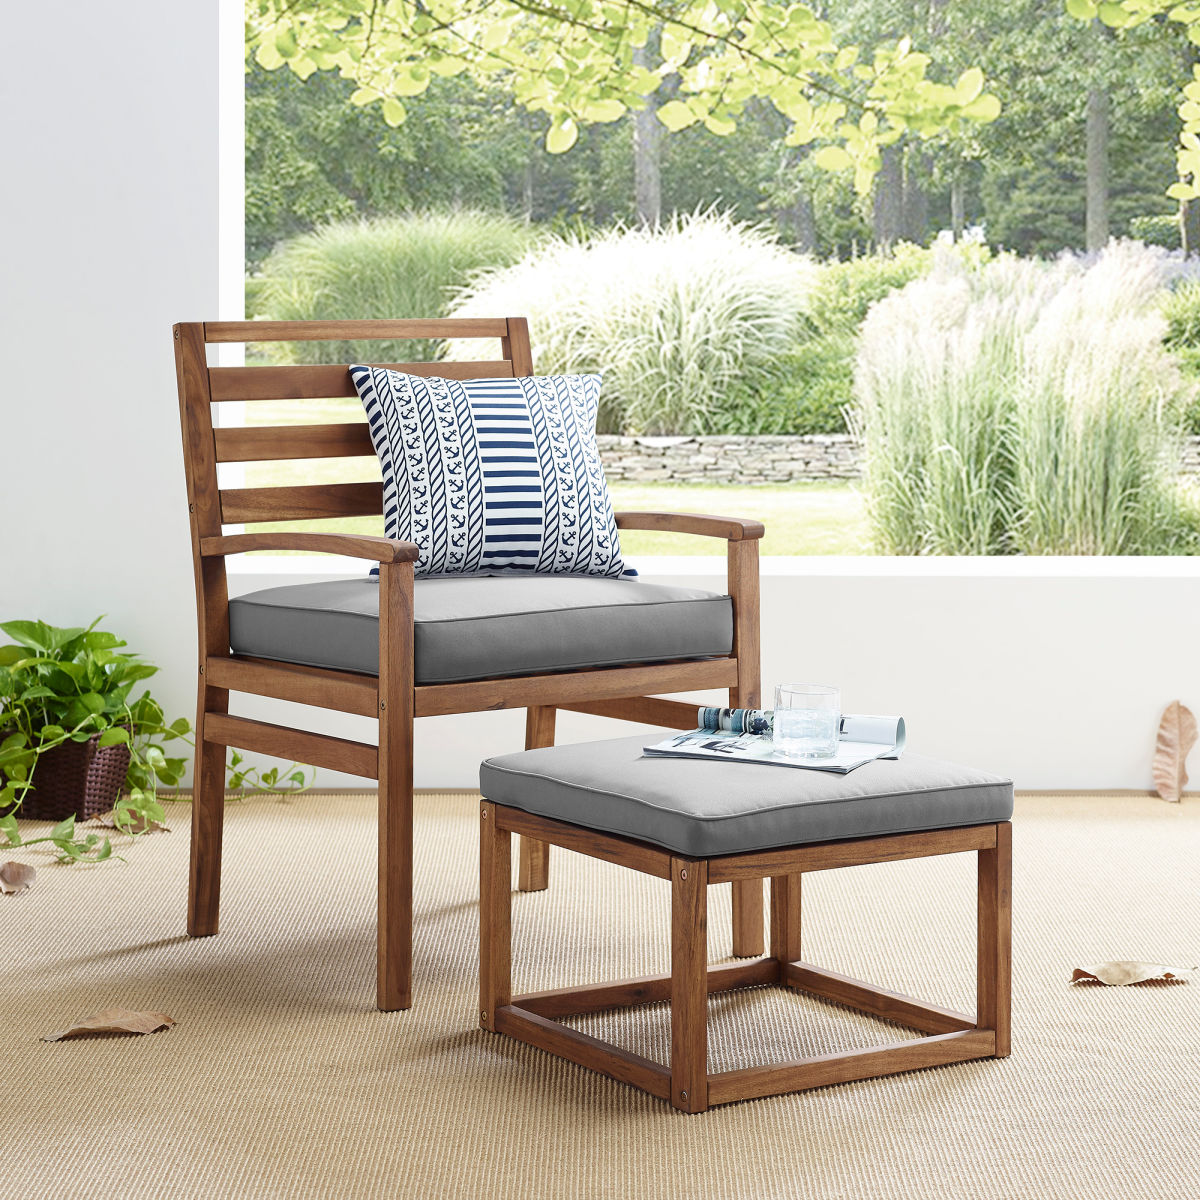 Manor Park Acacia Wood Outdoor Patio Chair & Pull Out Ottoman